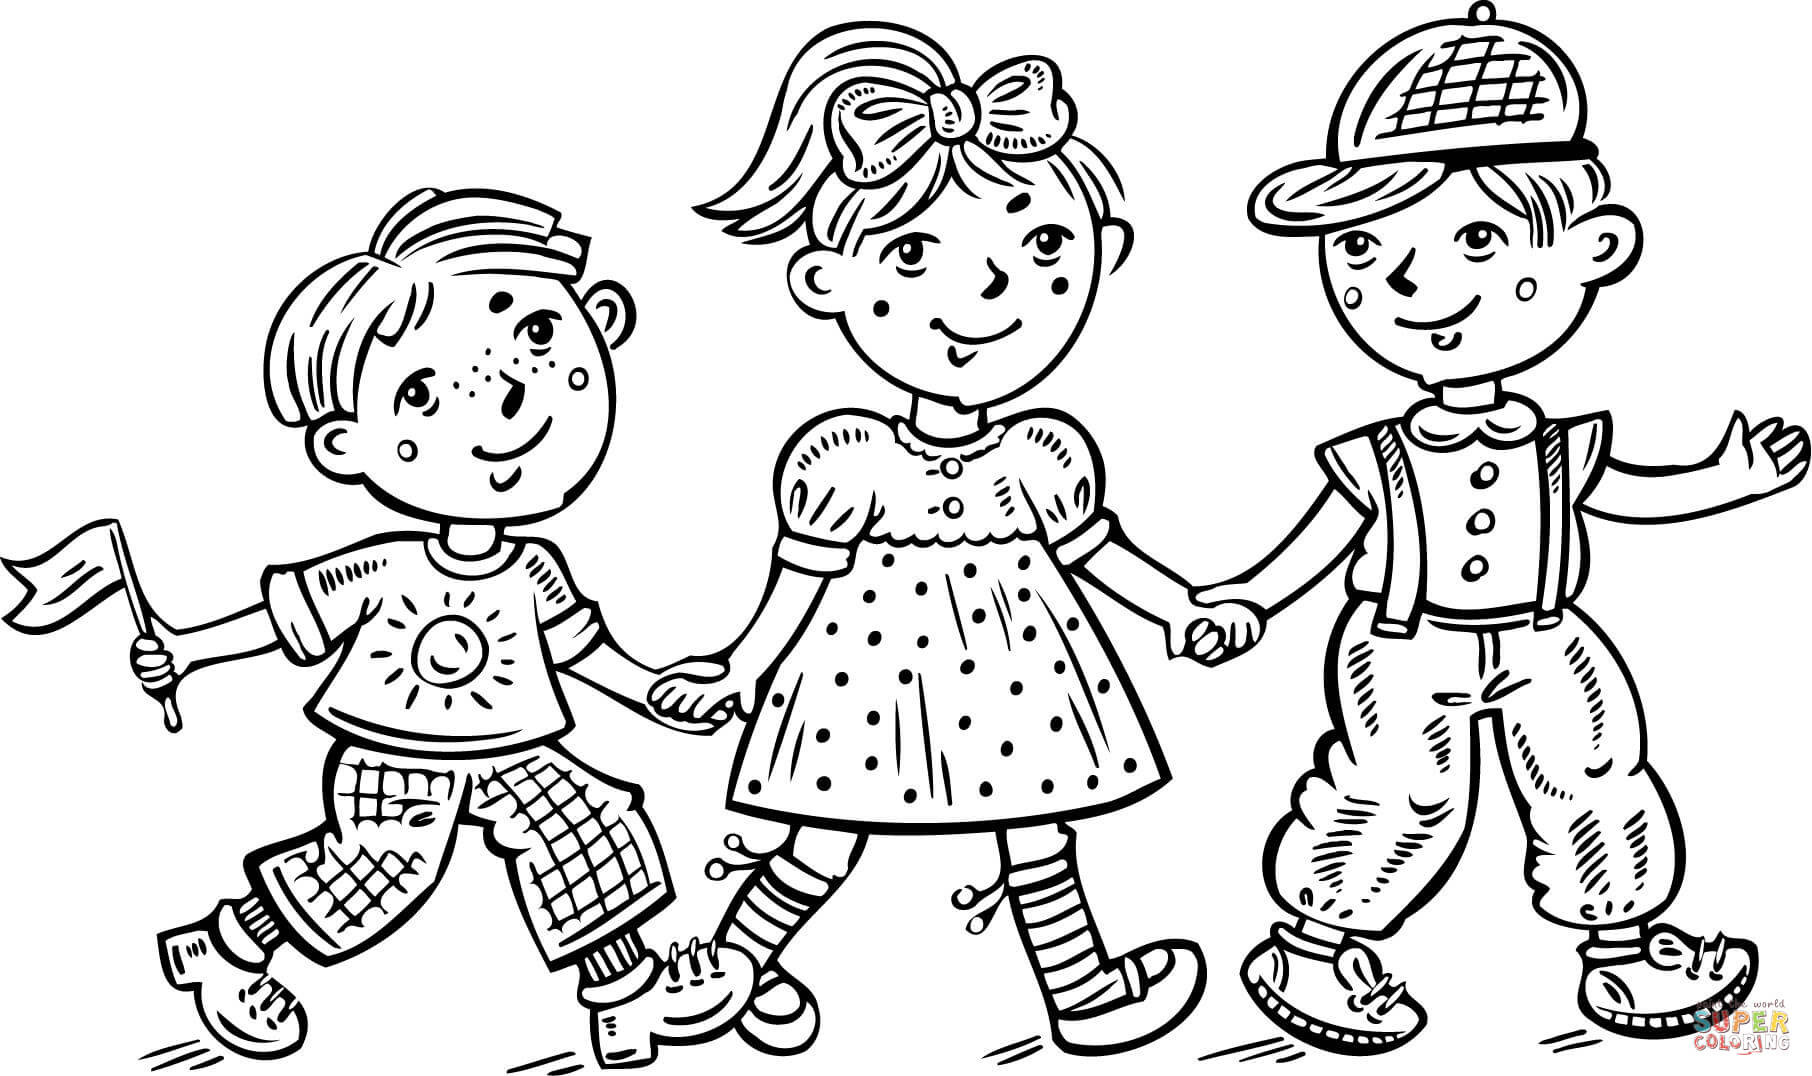 Kids Coloring Sheets For Boys
 Girl And Boy Coloring Page AZ Coloring Pages